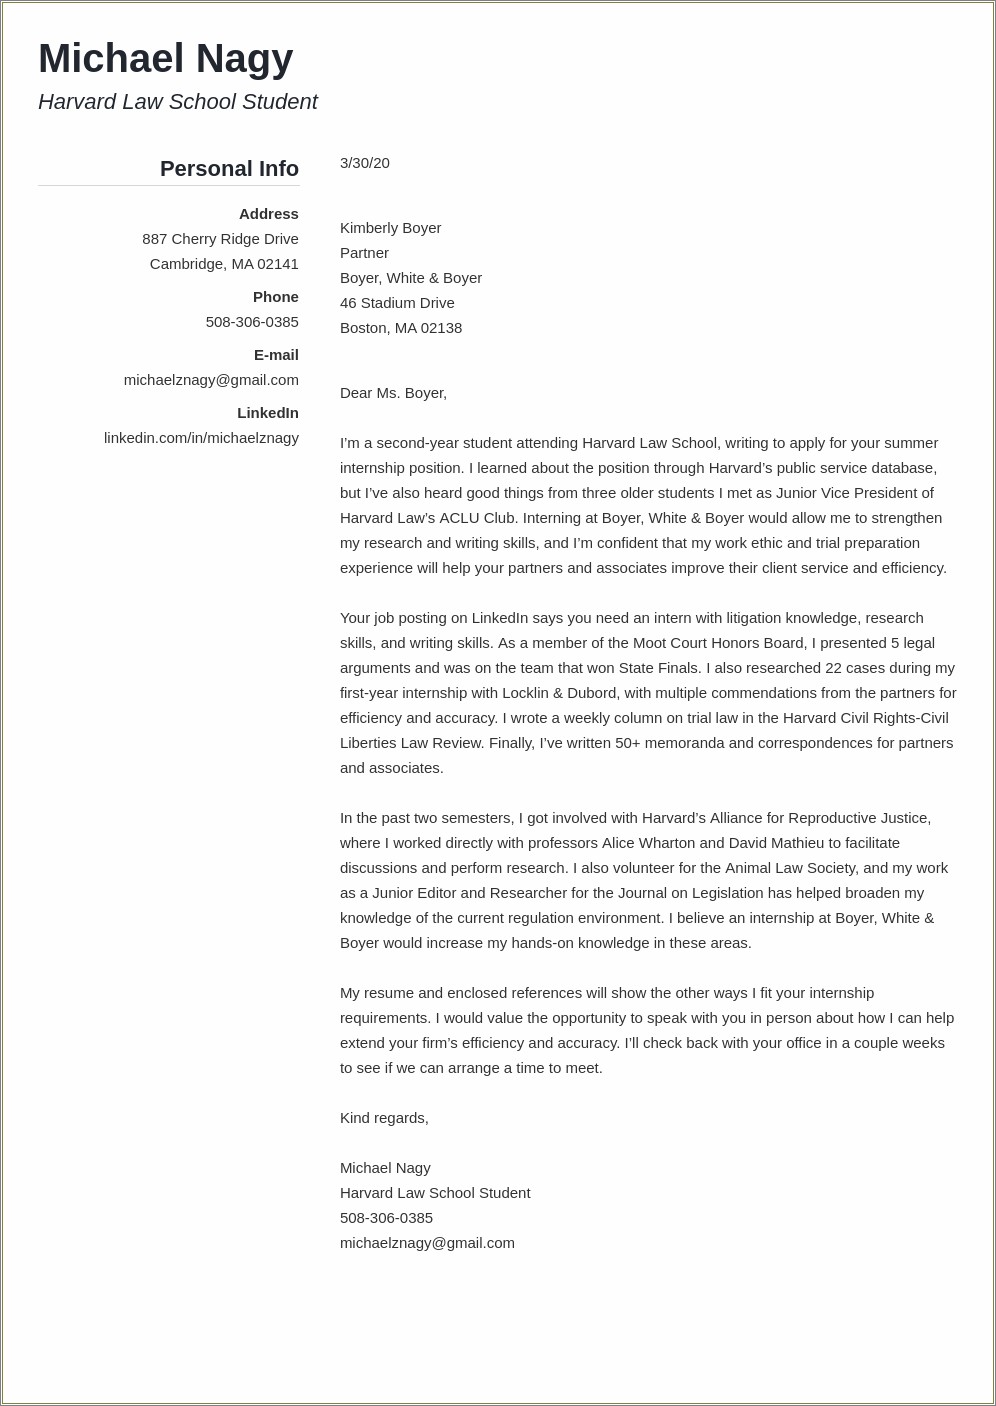 Resume Cover Letter Examples With Salary Requirements